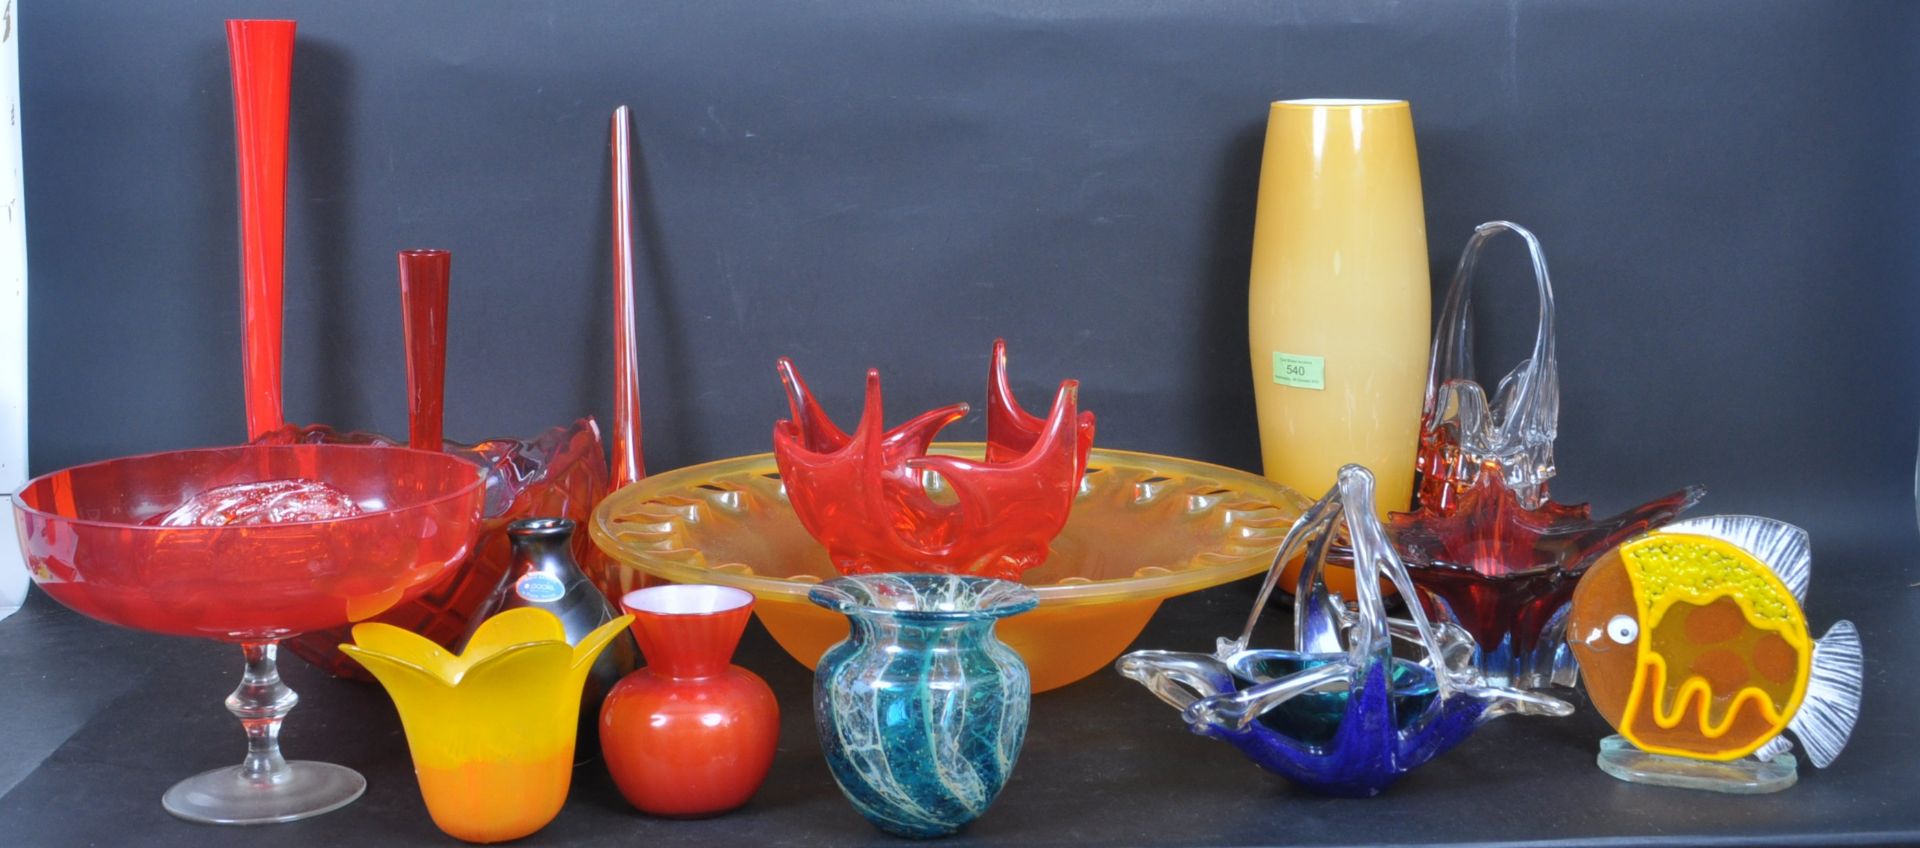 LARGE COLLECTION OF VINTAGE STUDIO ART GLASS WARE